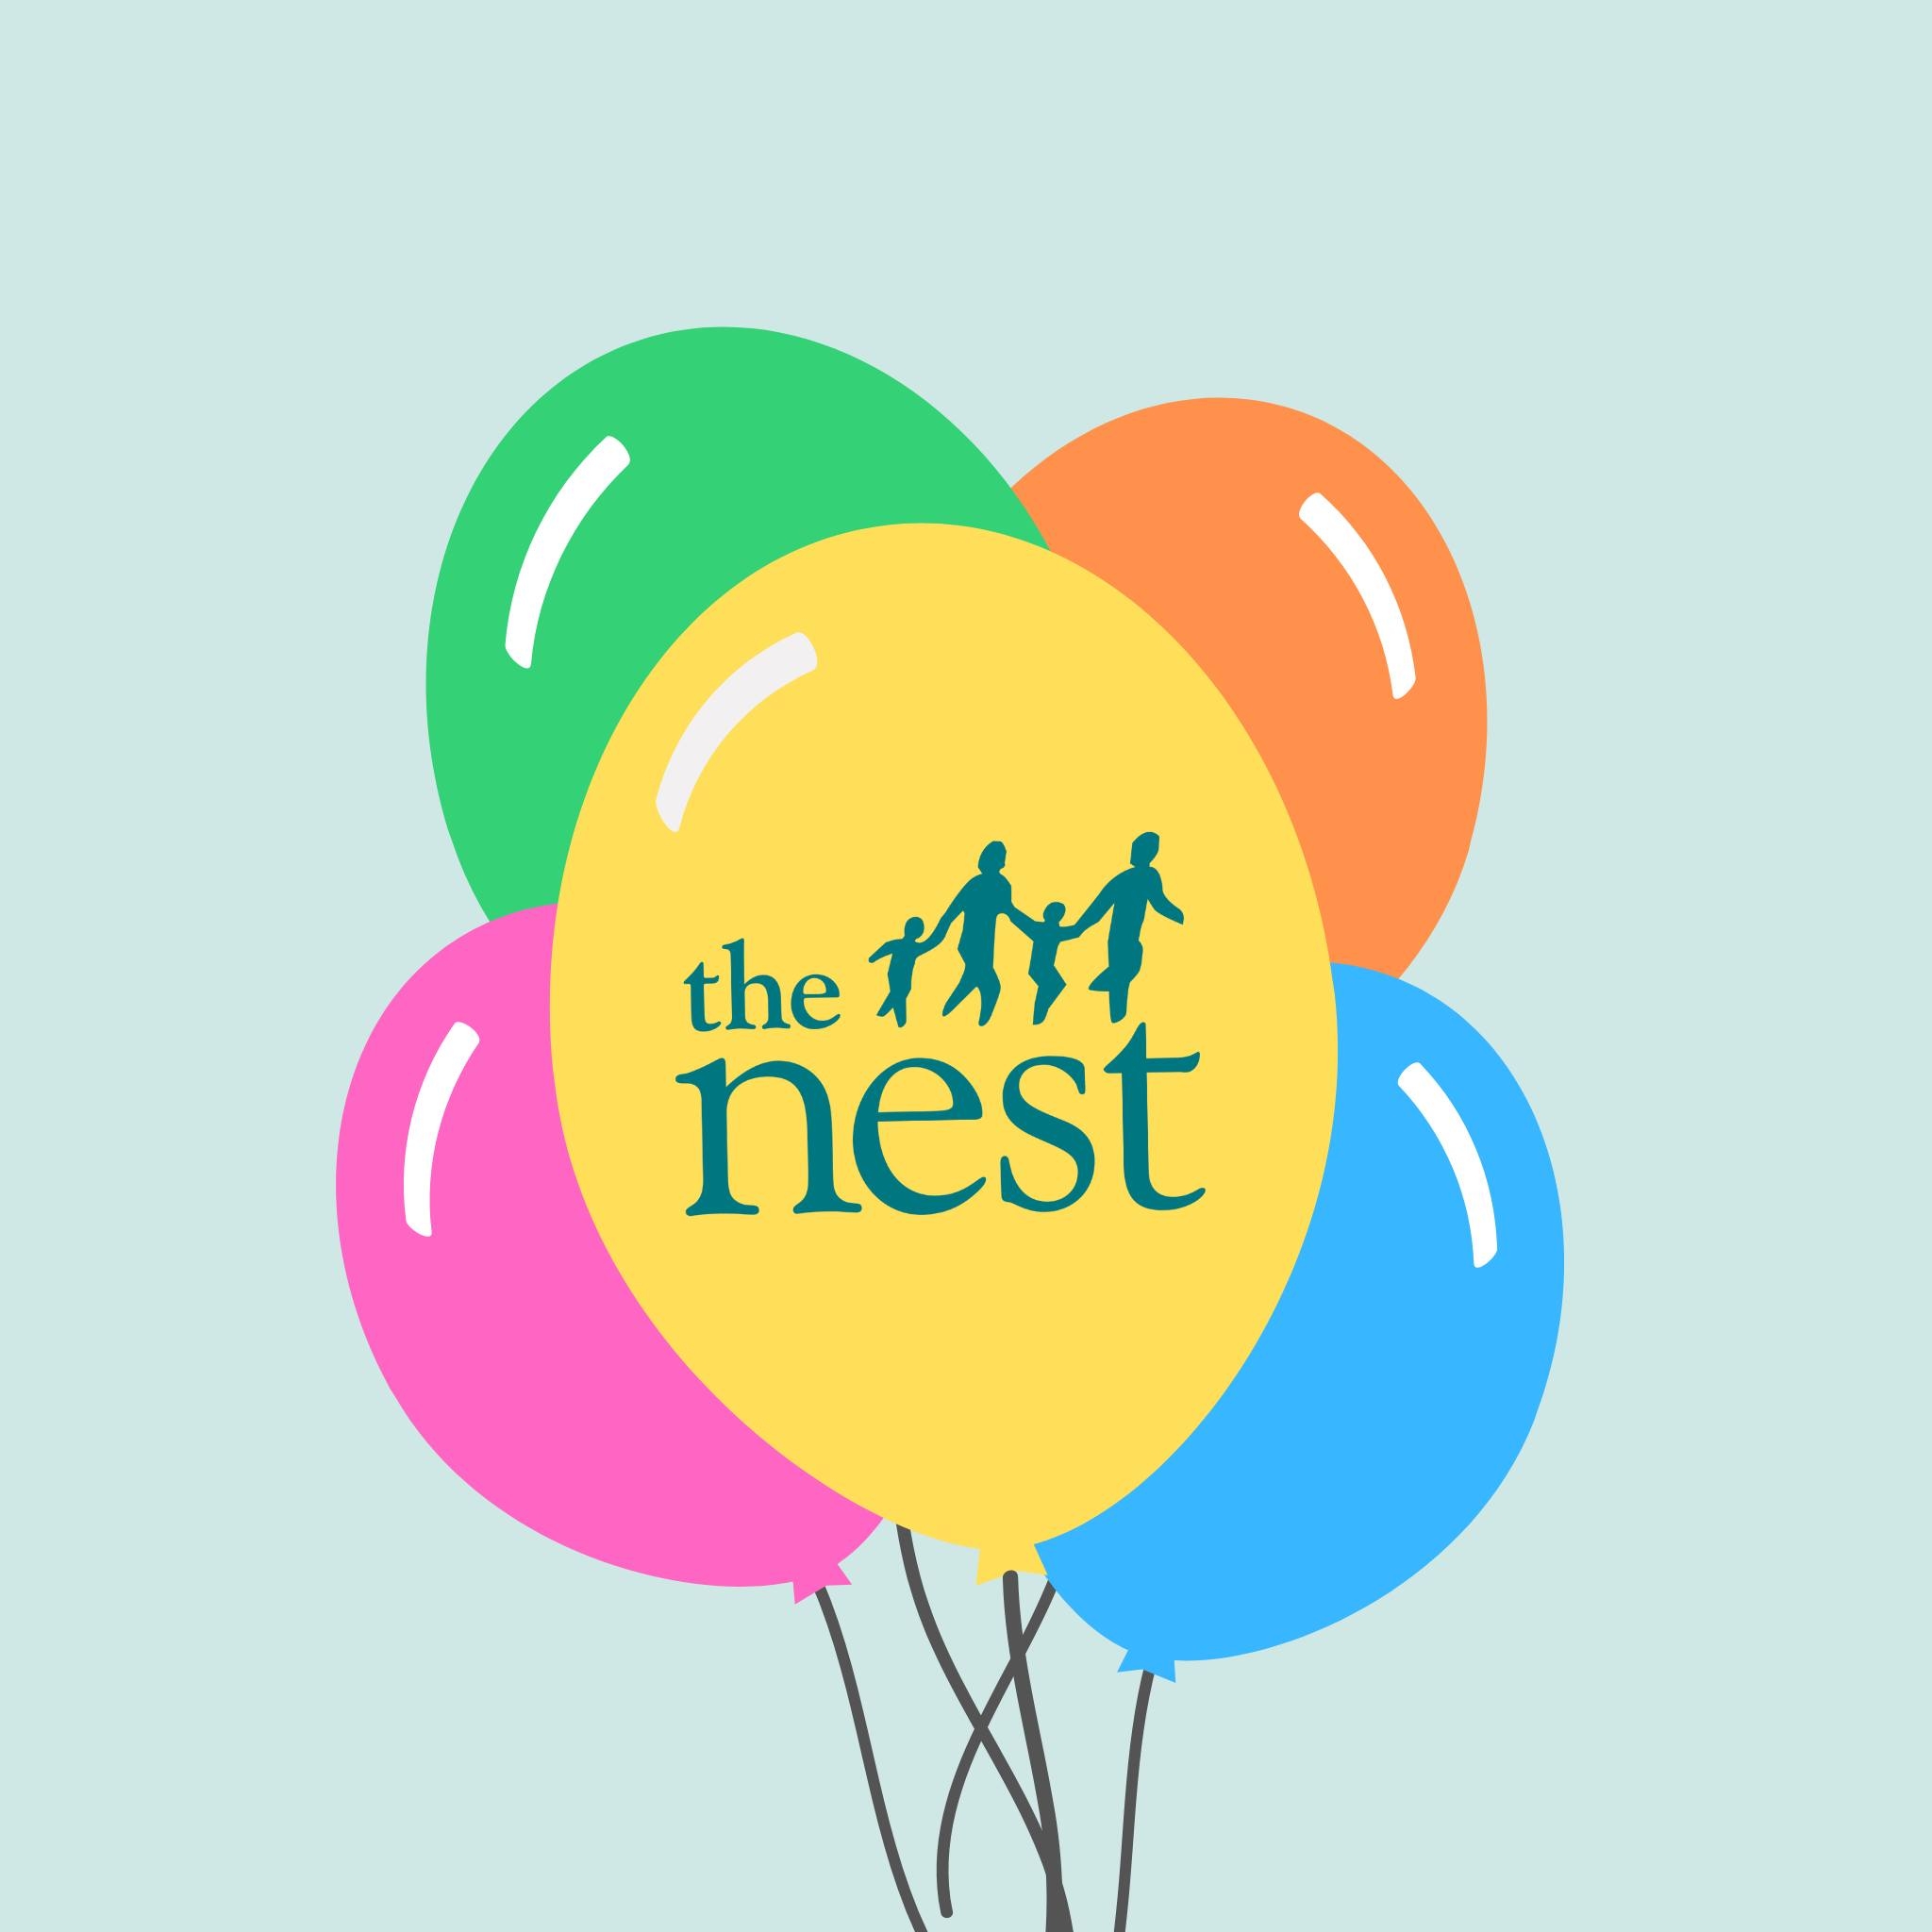 The Nest - Center for Women, Children, and Families